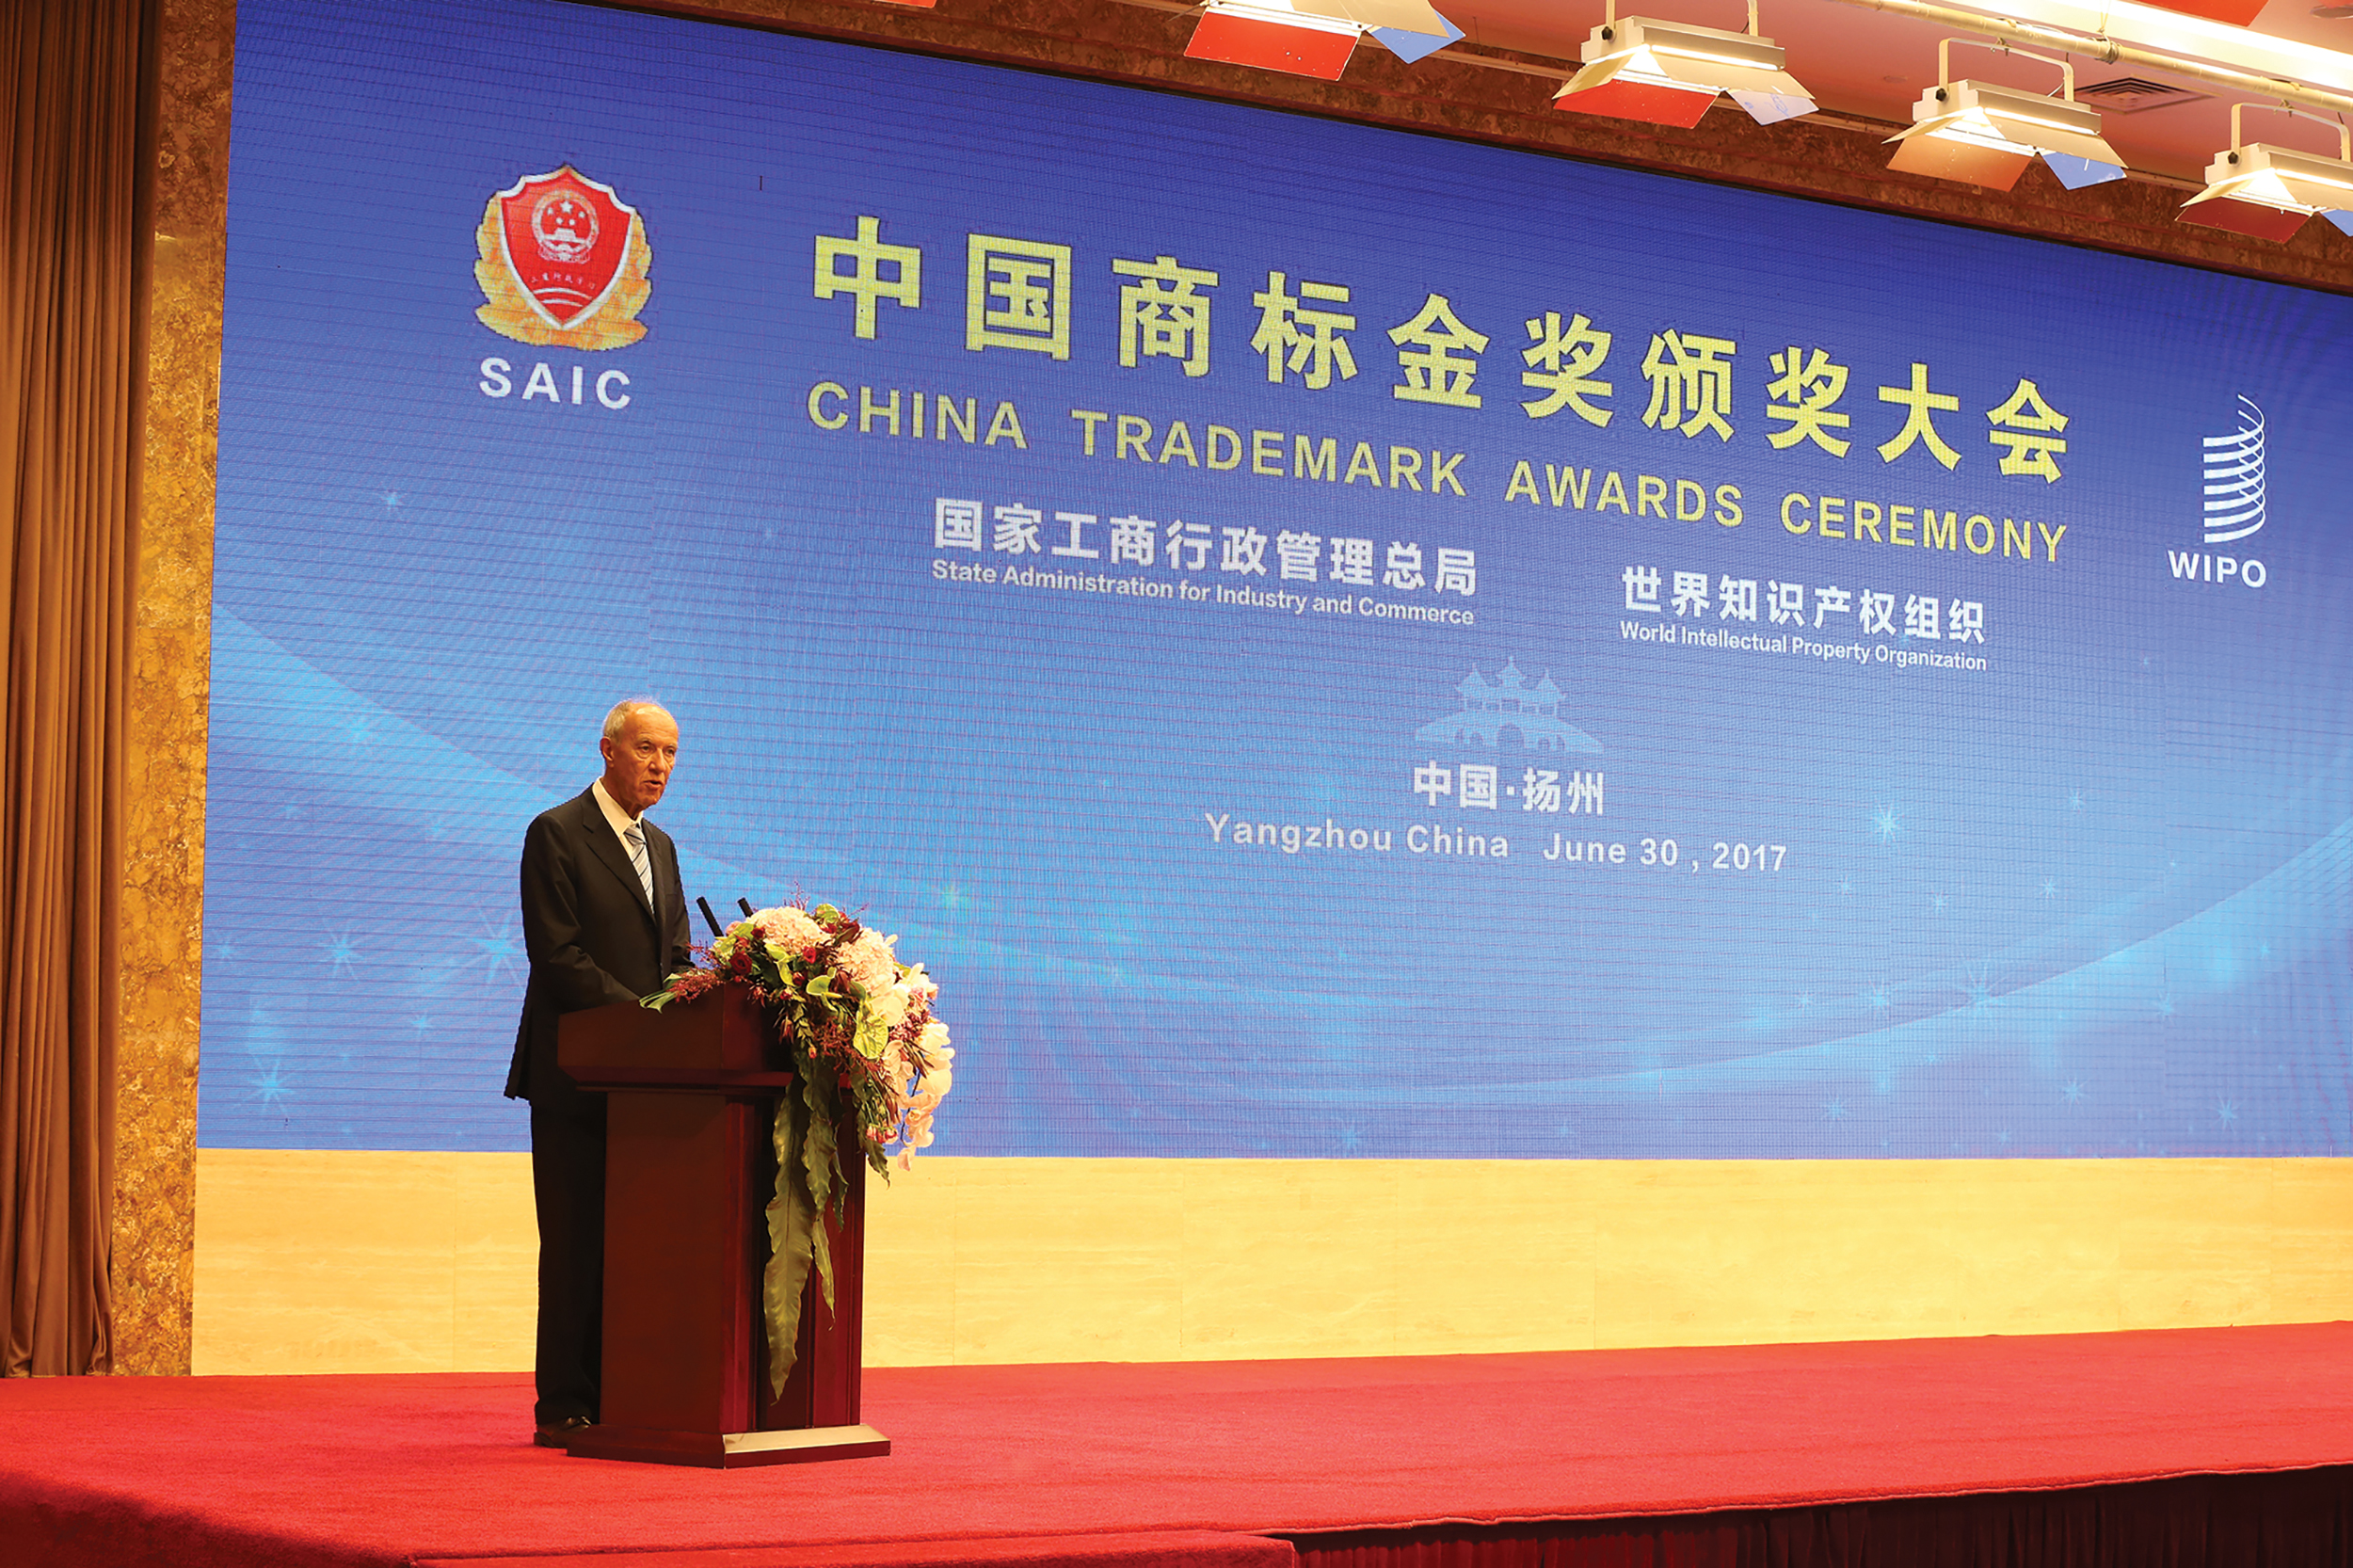 World Intellectual Property Organization Director General Francis Gurry speaks at Trademarks Award Ceremony in Yangzhou, China